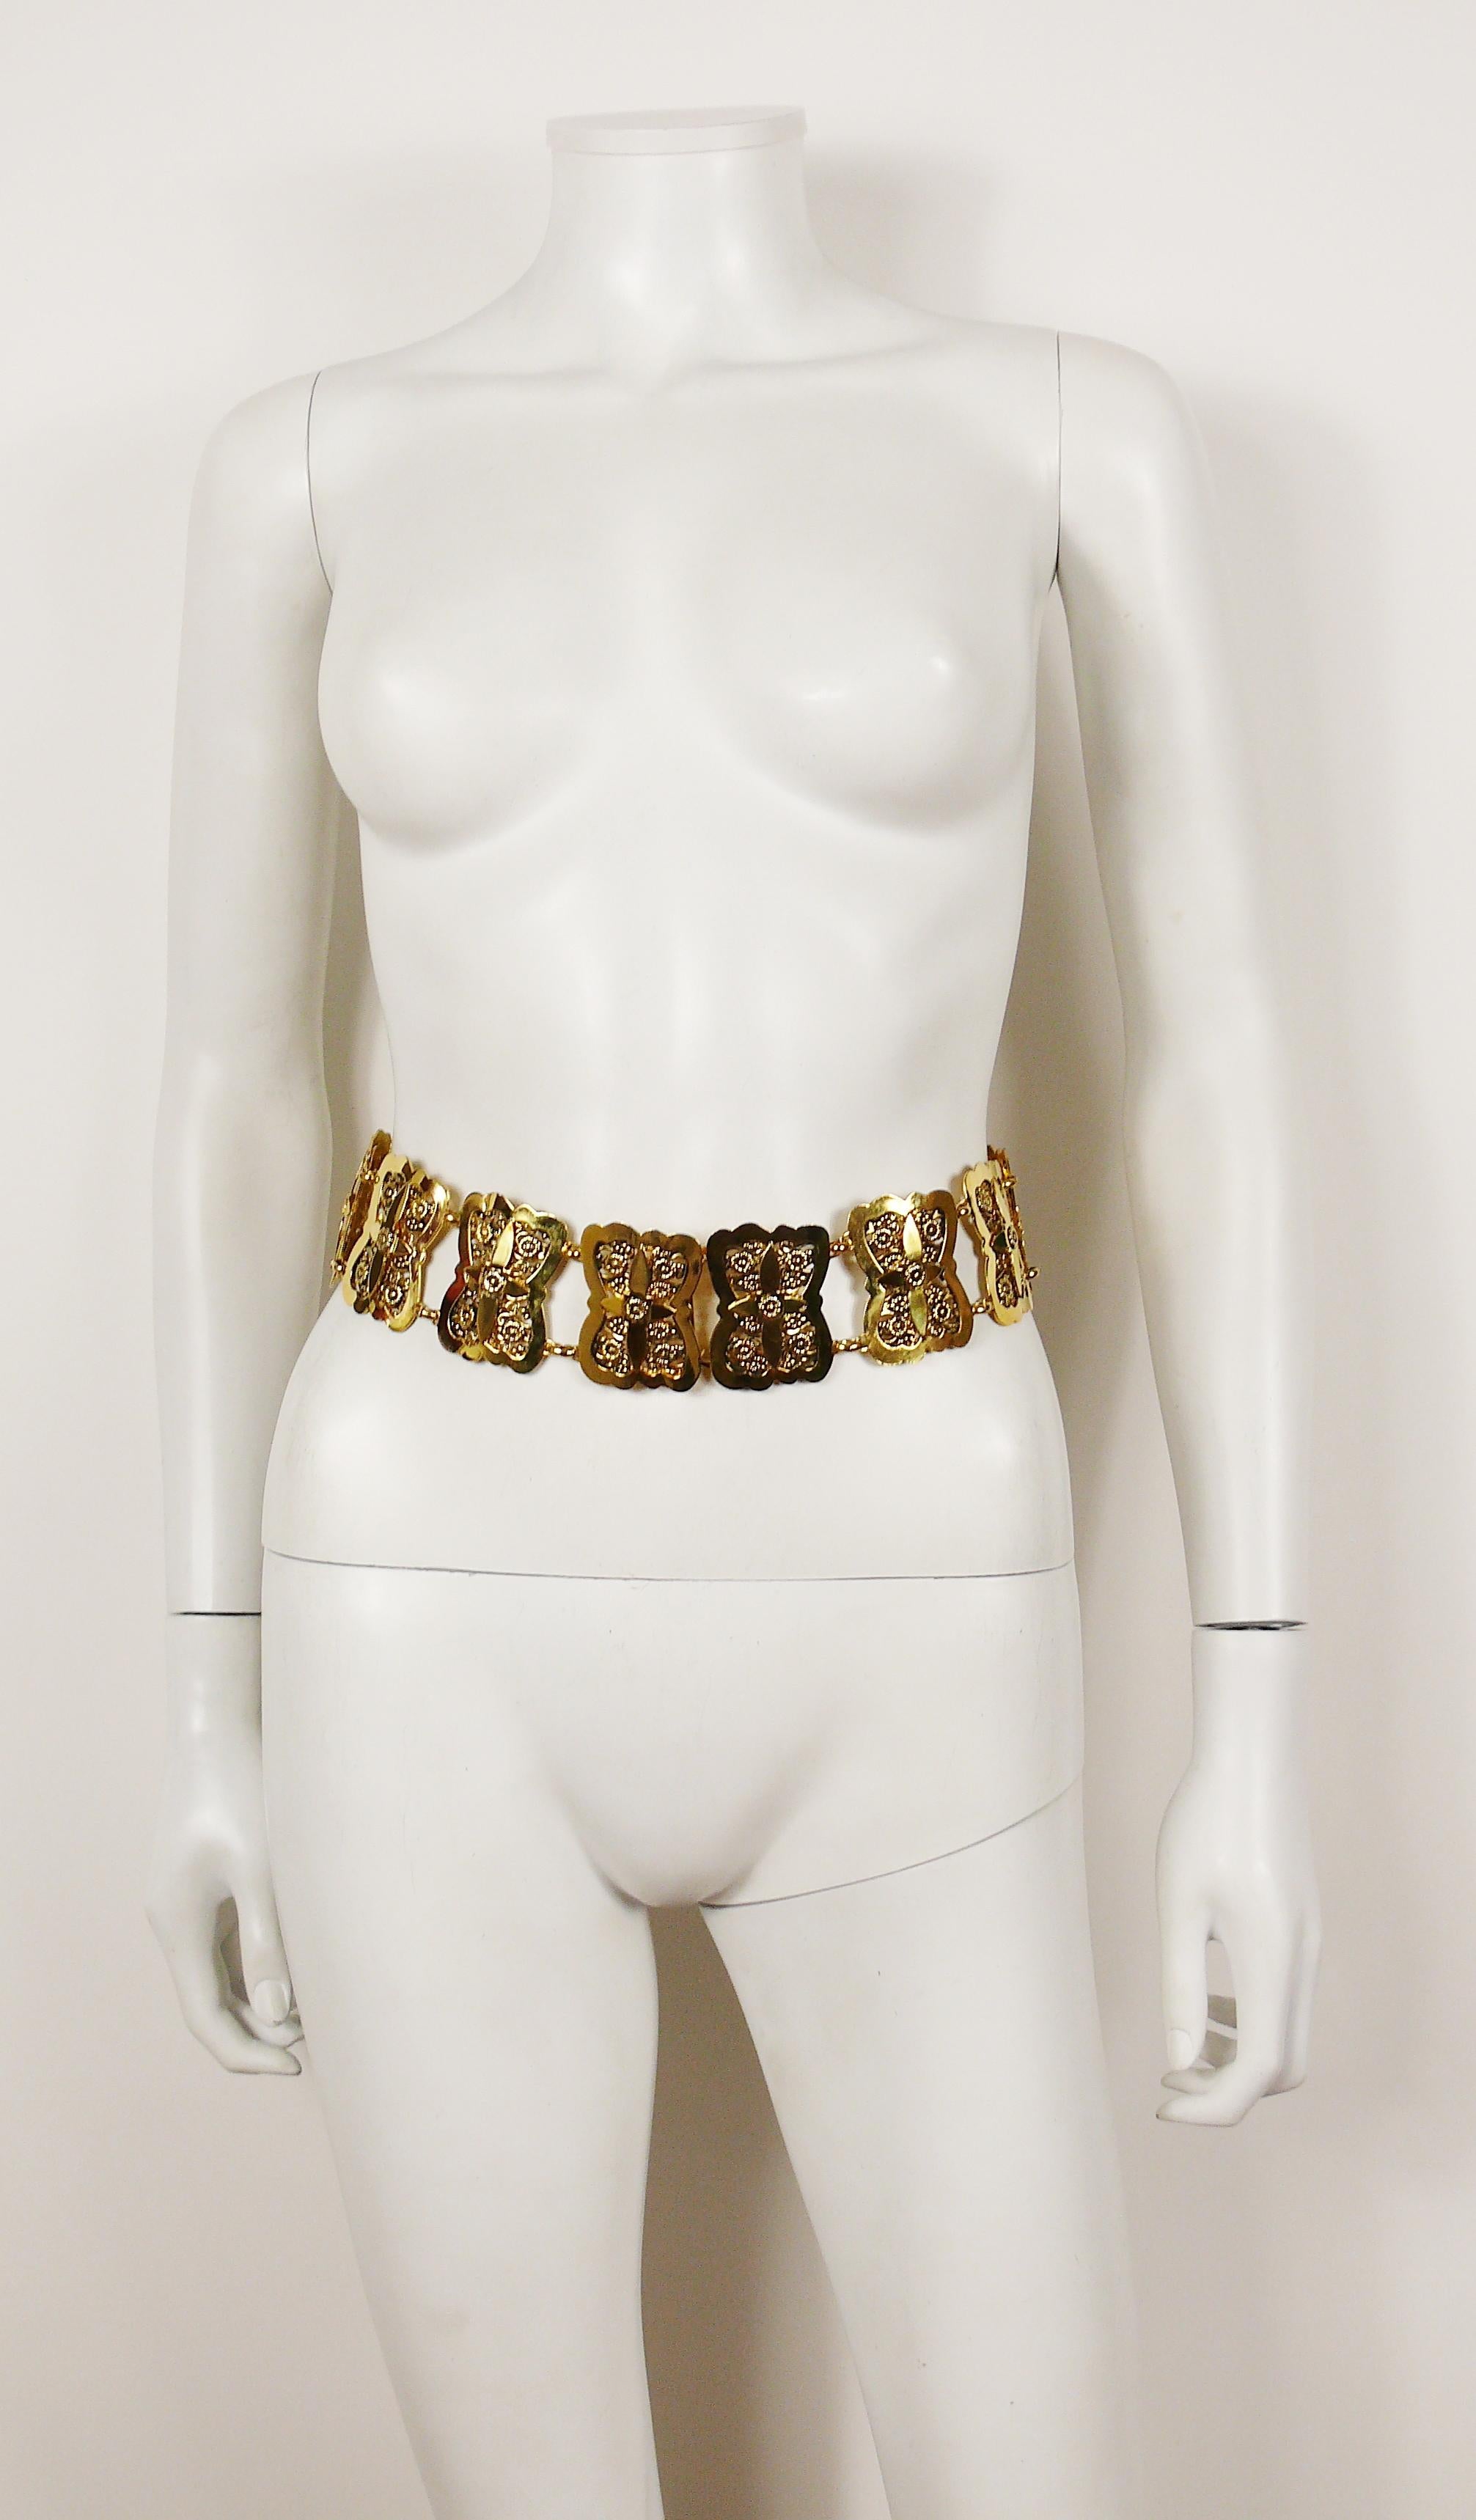 CHANEL vintage amazing antiqued gold tone filigree belt featuring iconic camelia design links.

Collection season 23 (1988).

Hook clasp.

Marked CHANEL 2 3 MADE IN FRANCE.
Private sale 